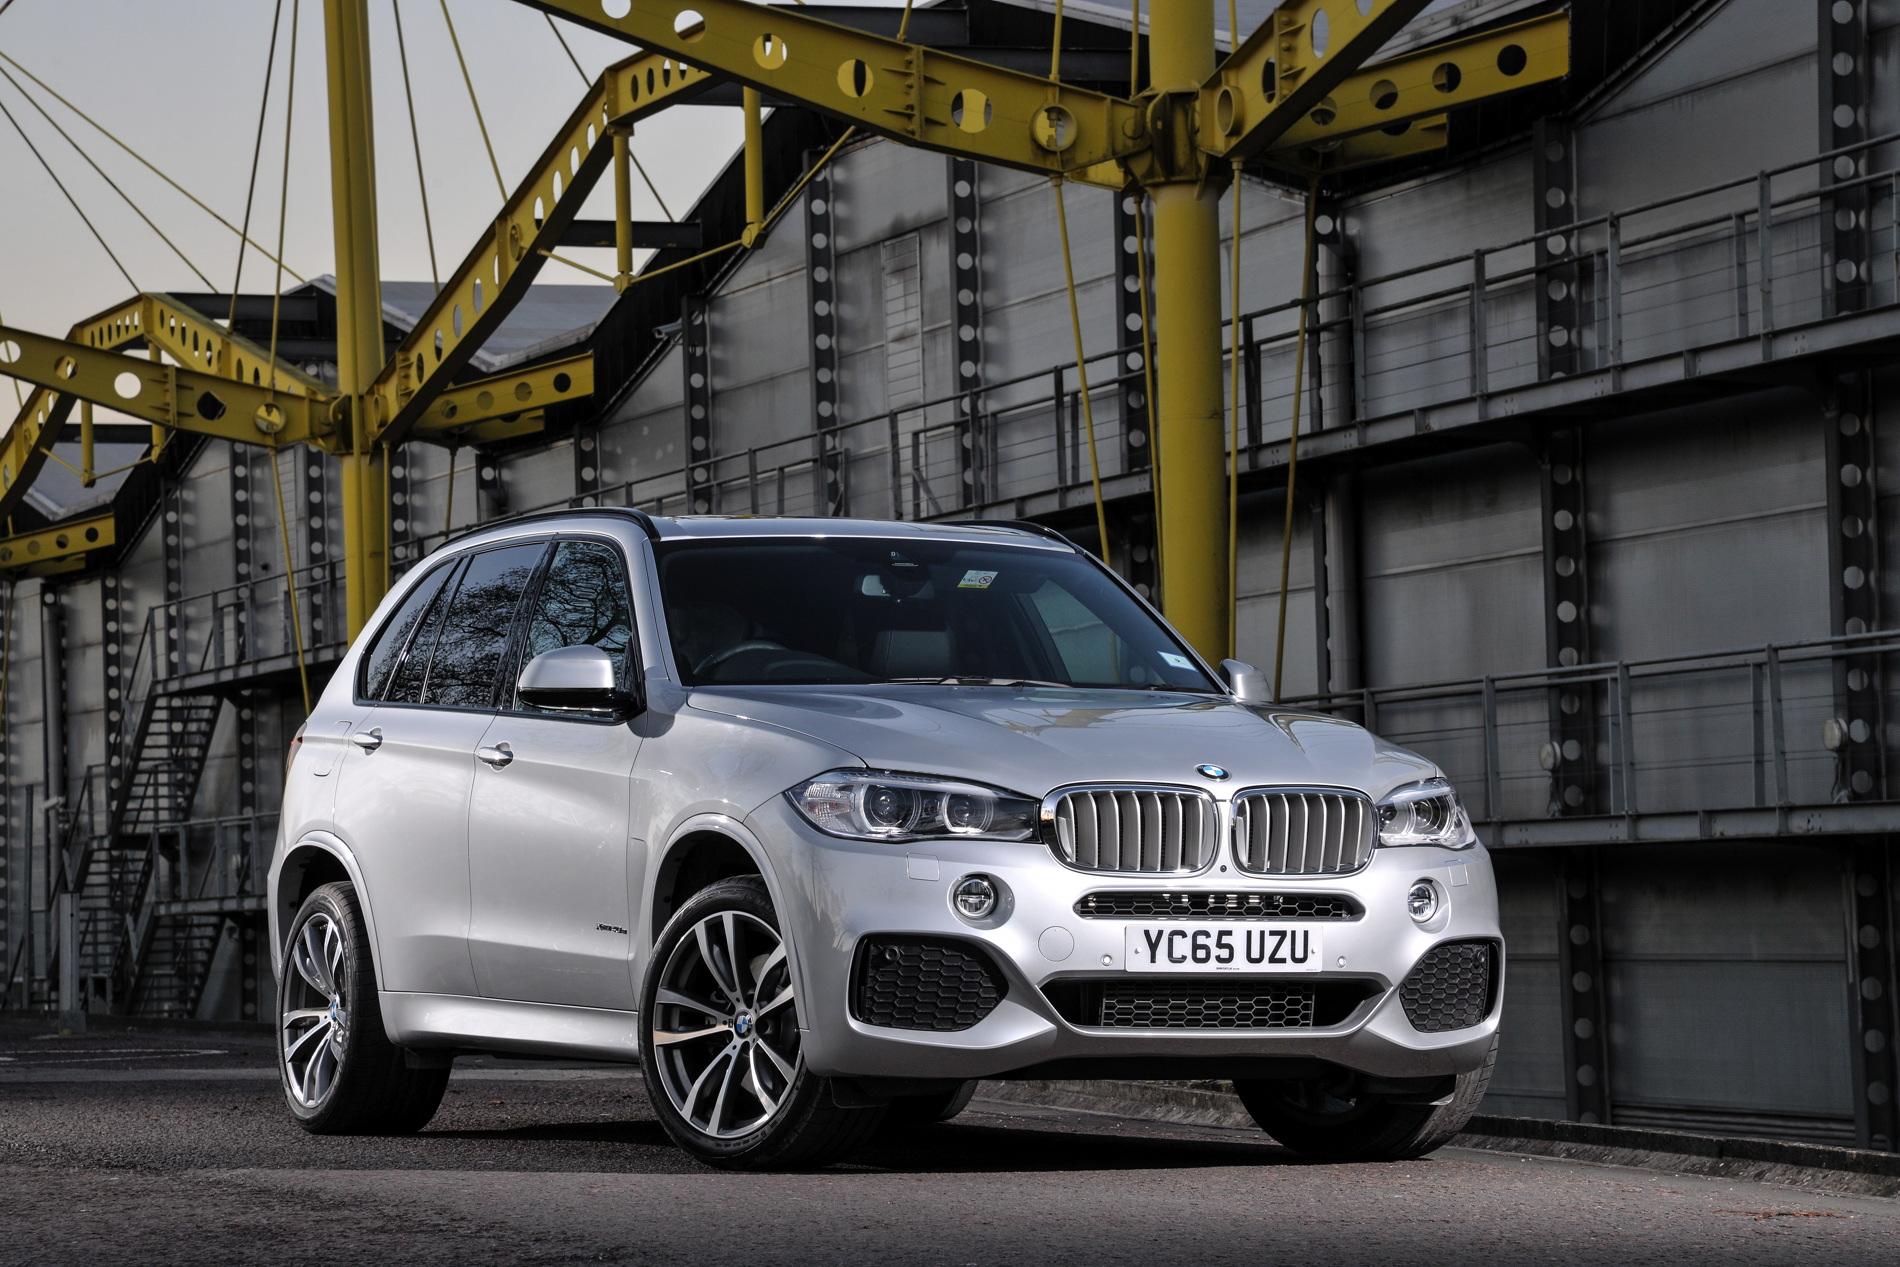 Rumor: BMW X3 Plug In Hybrid Halted, Likely To Be Cancelled In Favor